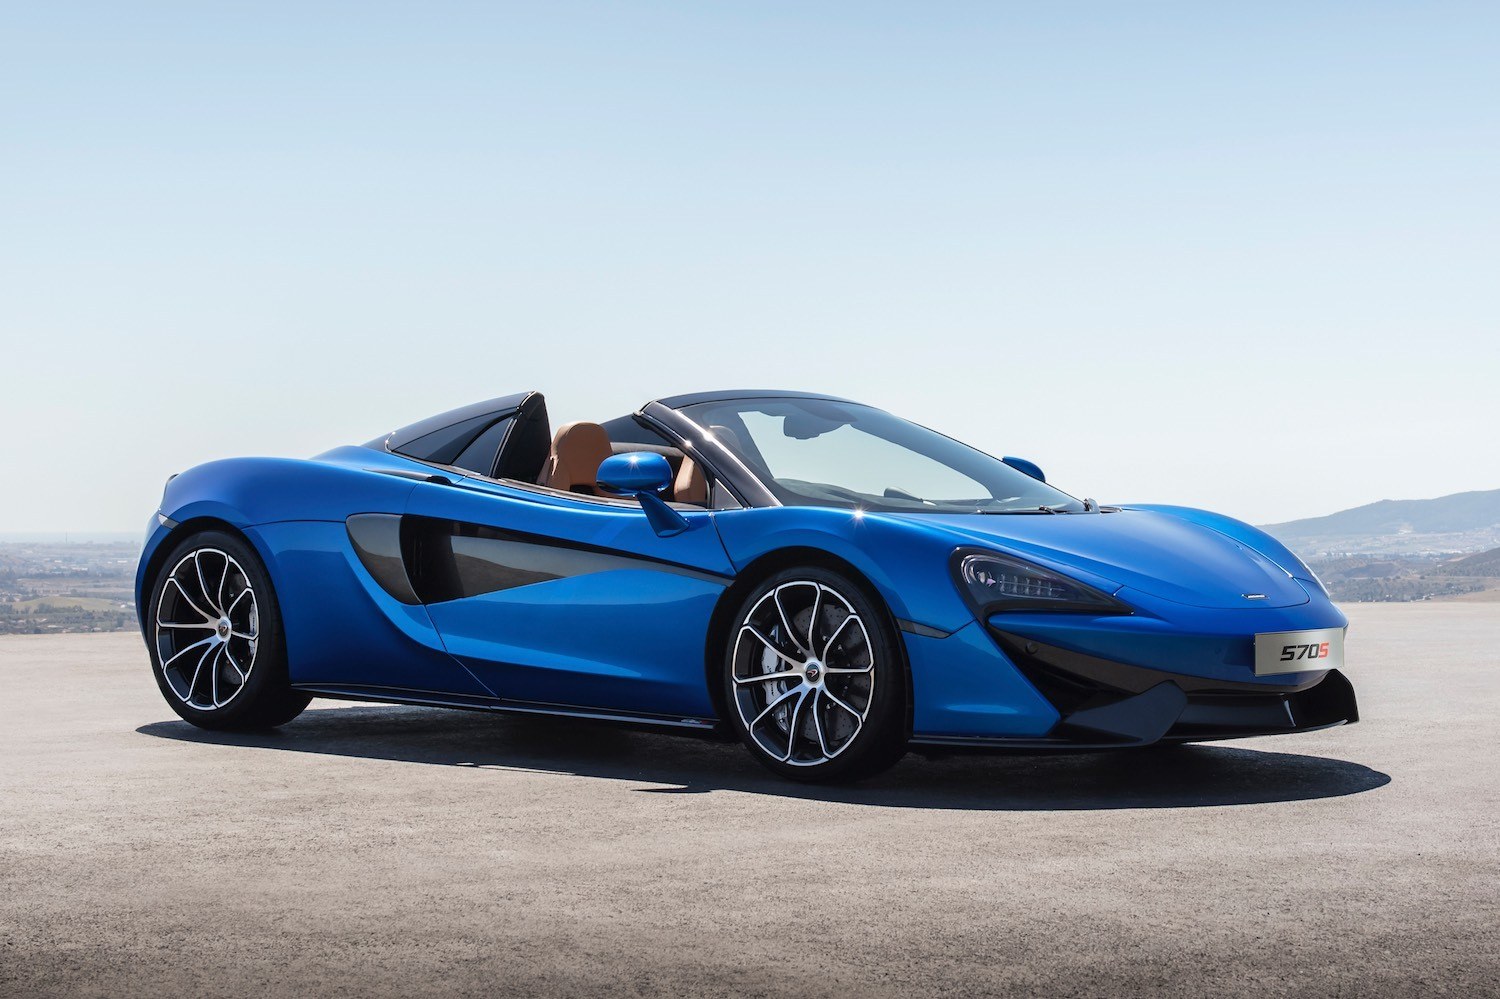 Neil Lyndon reviews the latest New McLaren 720S Spider for Drive 1